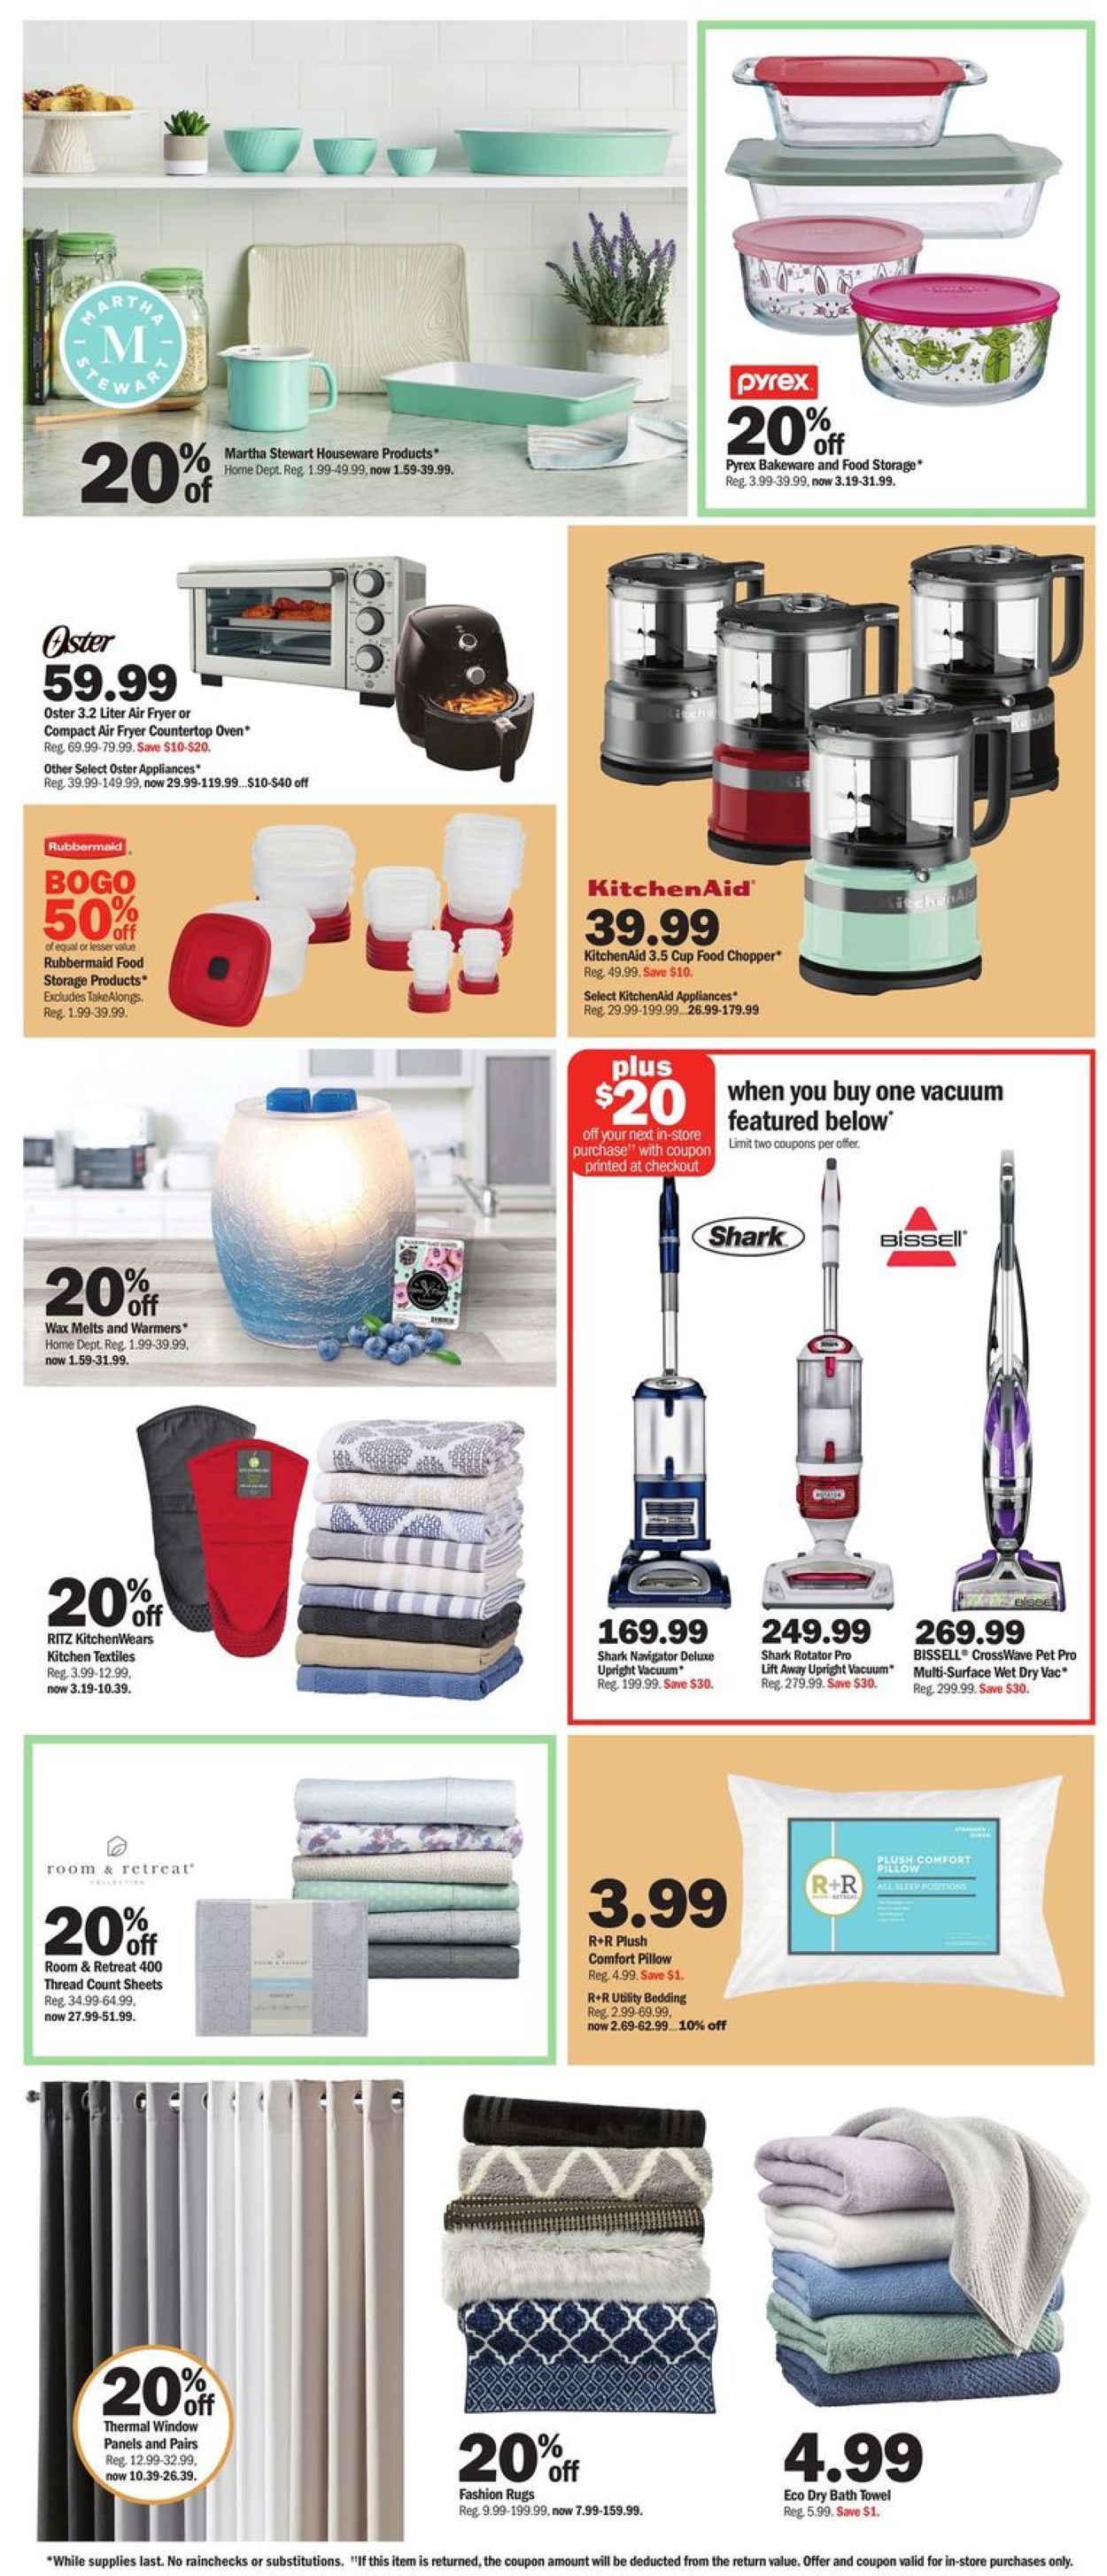 Catalogue Meijer - Easter 2021 ad from 03/28/2021